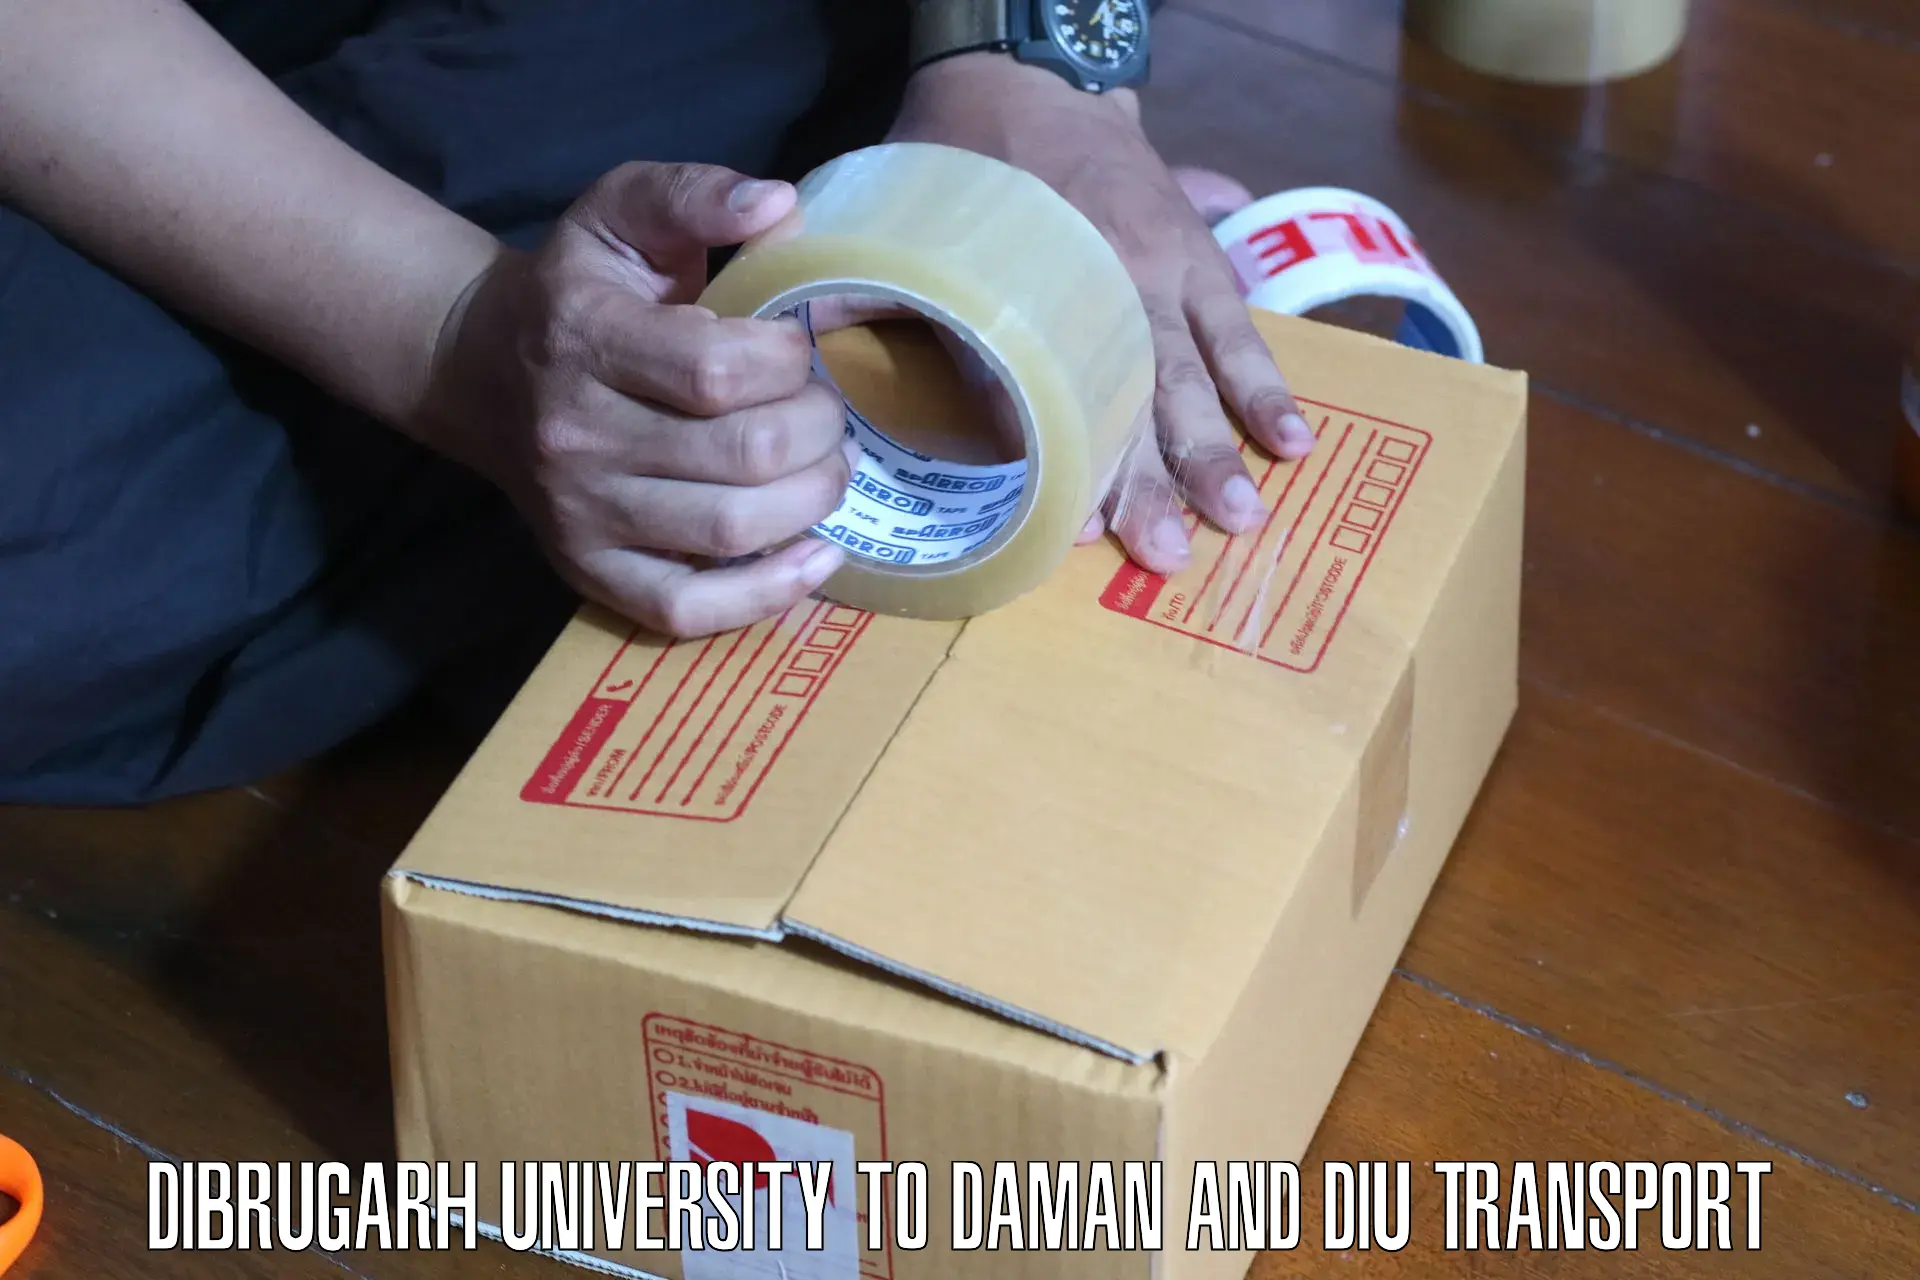 Daily parcel service transport Dibrugarh University to Daman and Diu